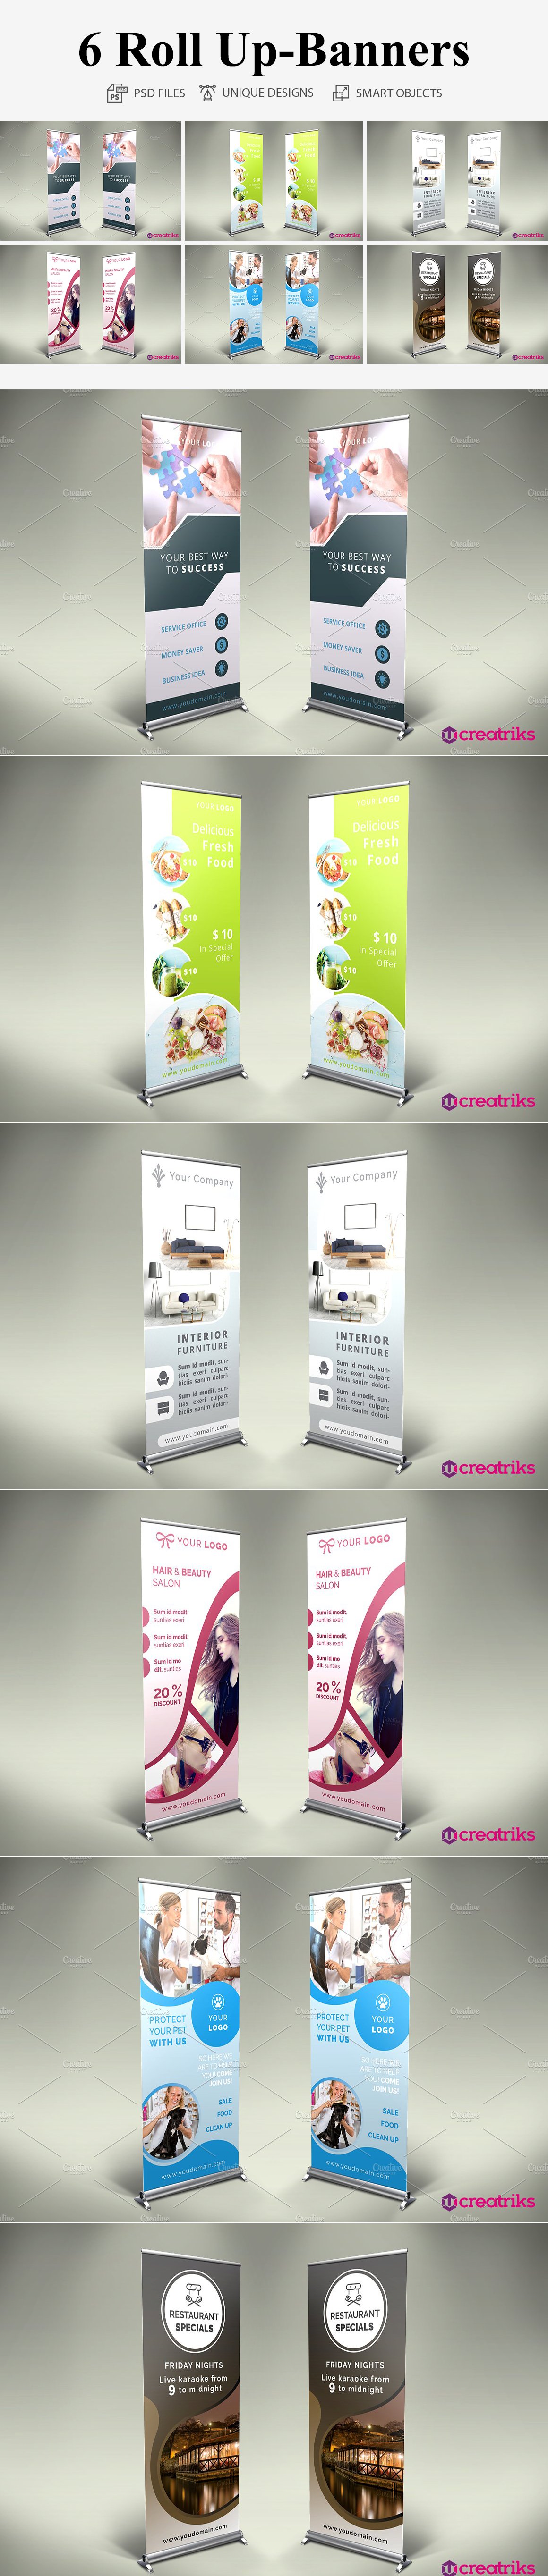 6 Roll Up Banners cover image.